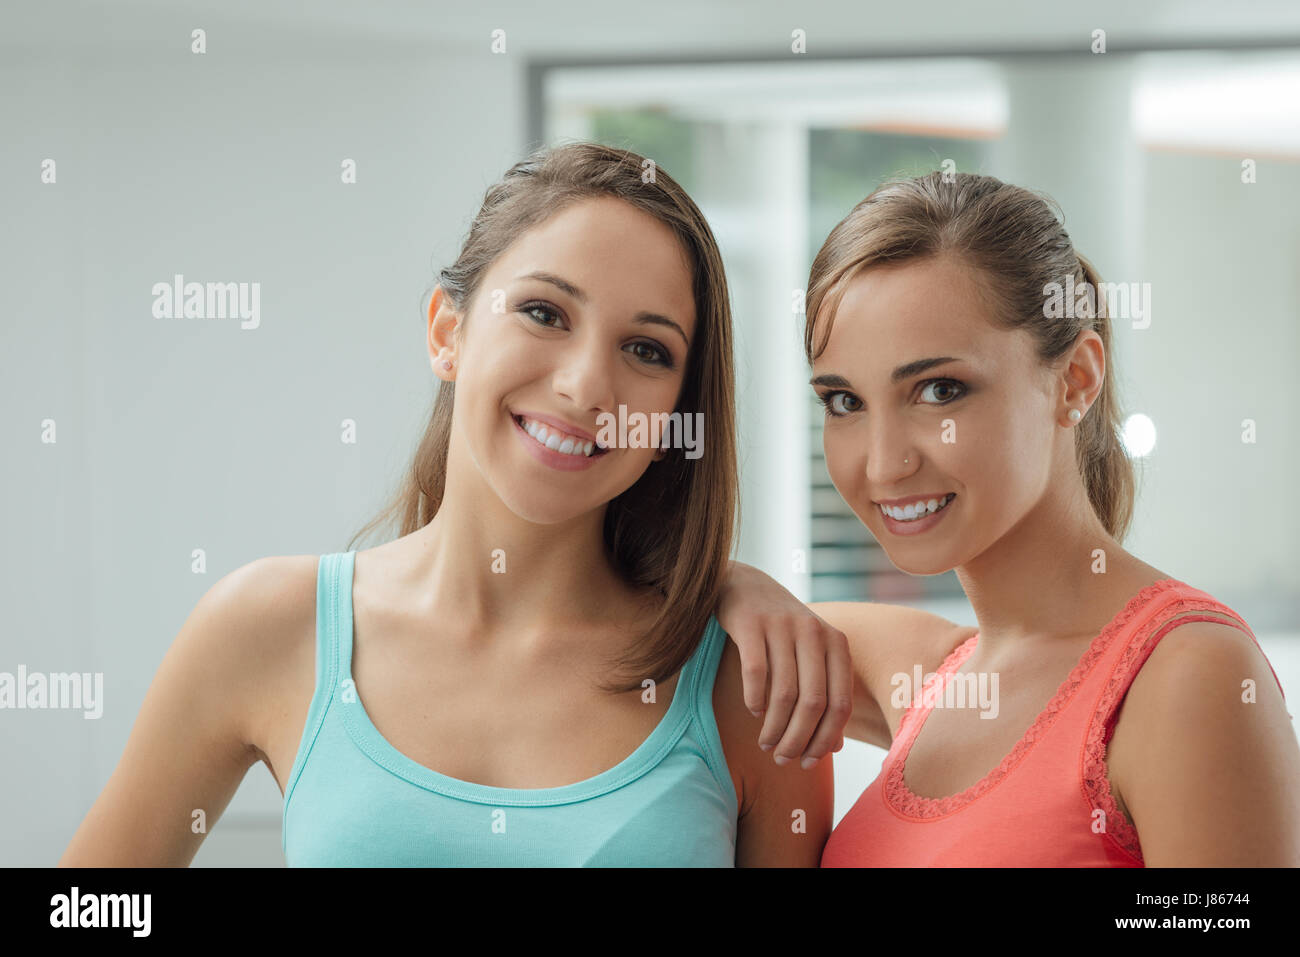 Cute smiling girls posing together and looking at camera, on se penche sur l'épaule de son ami Banque D'Images